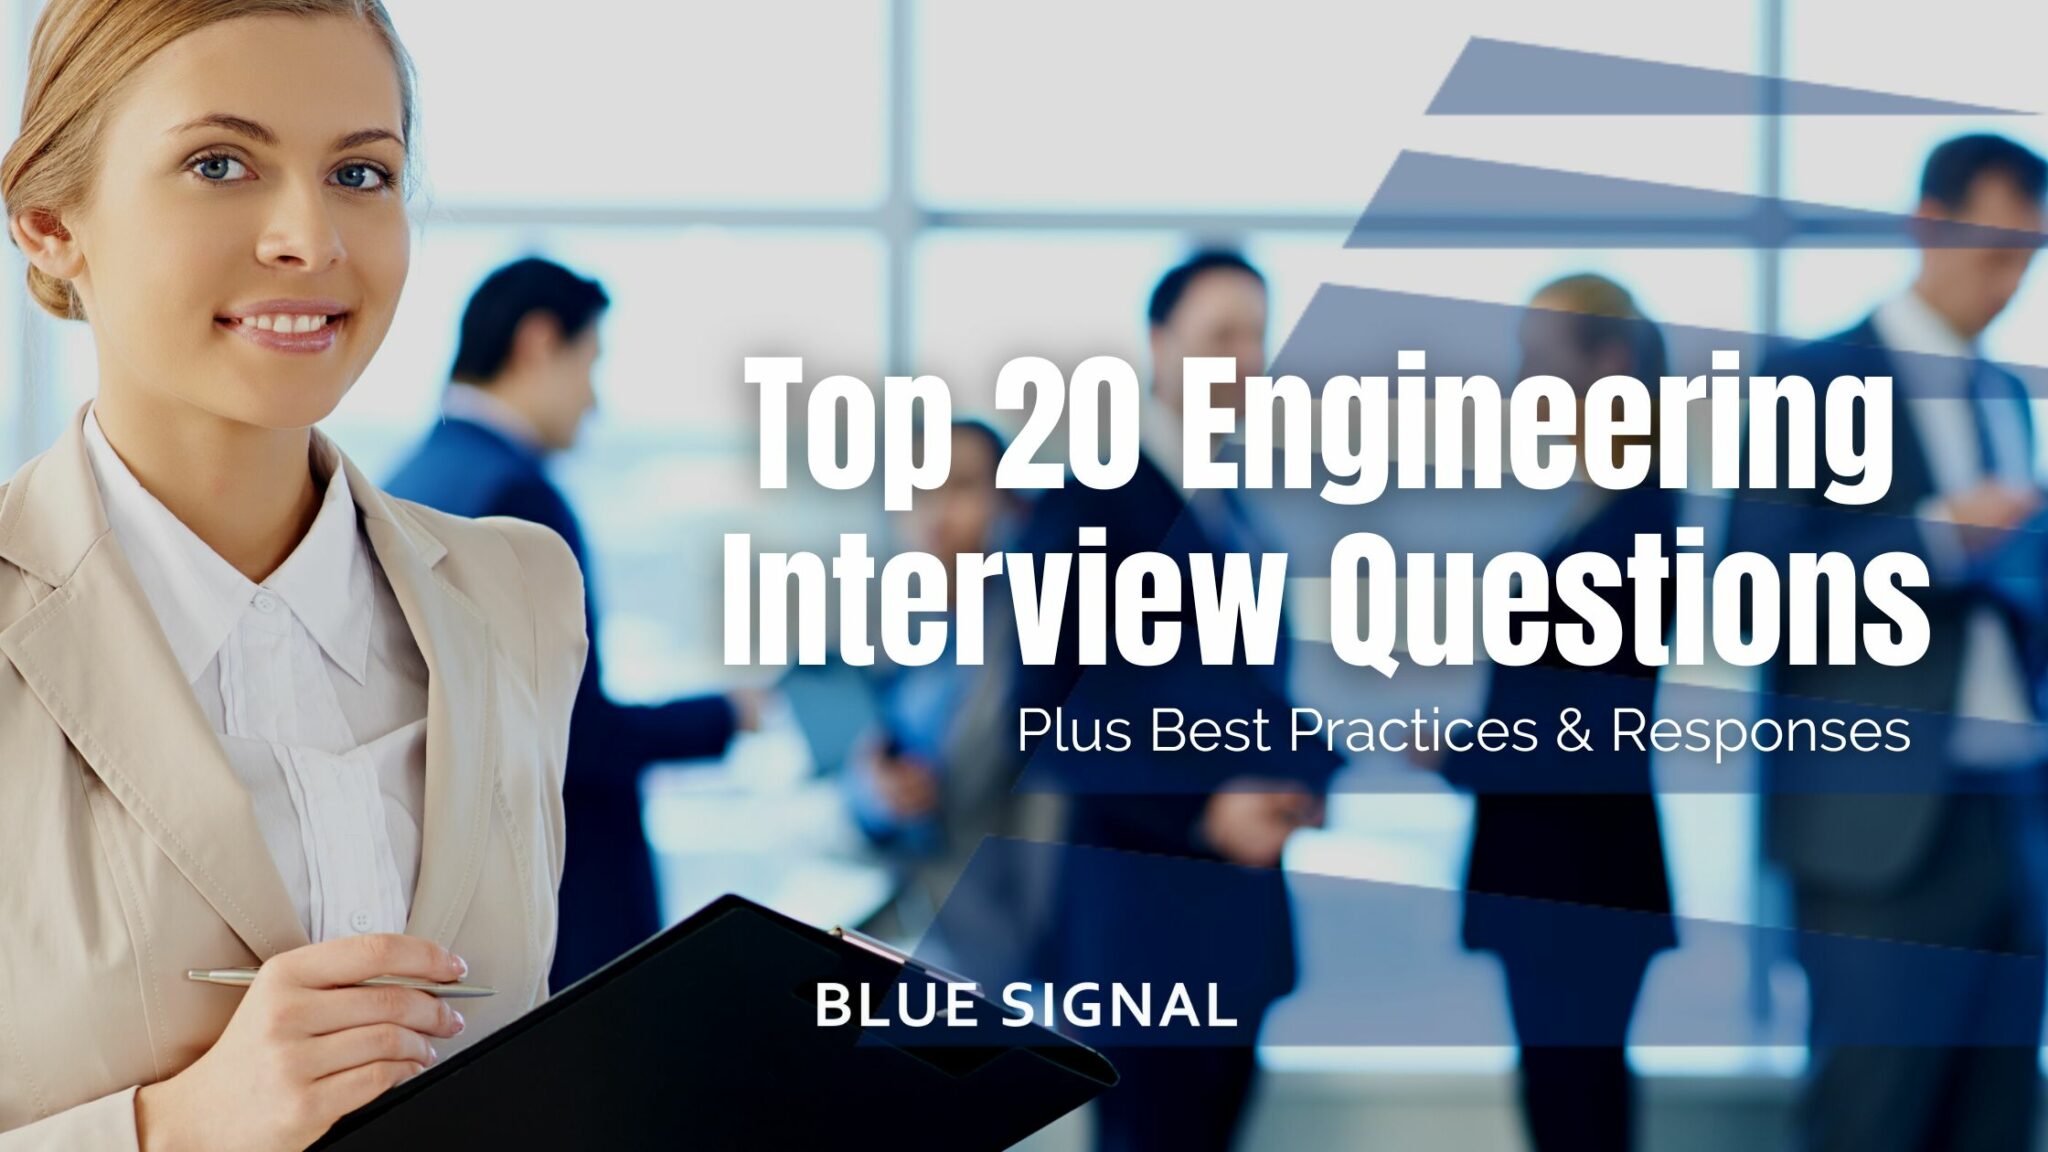 woman smiling with clipboard ready to interview other people standing in background of photo with text on top stating Top 20 Engineering Interview Questions Plus Best Practices & Responses